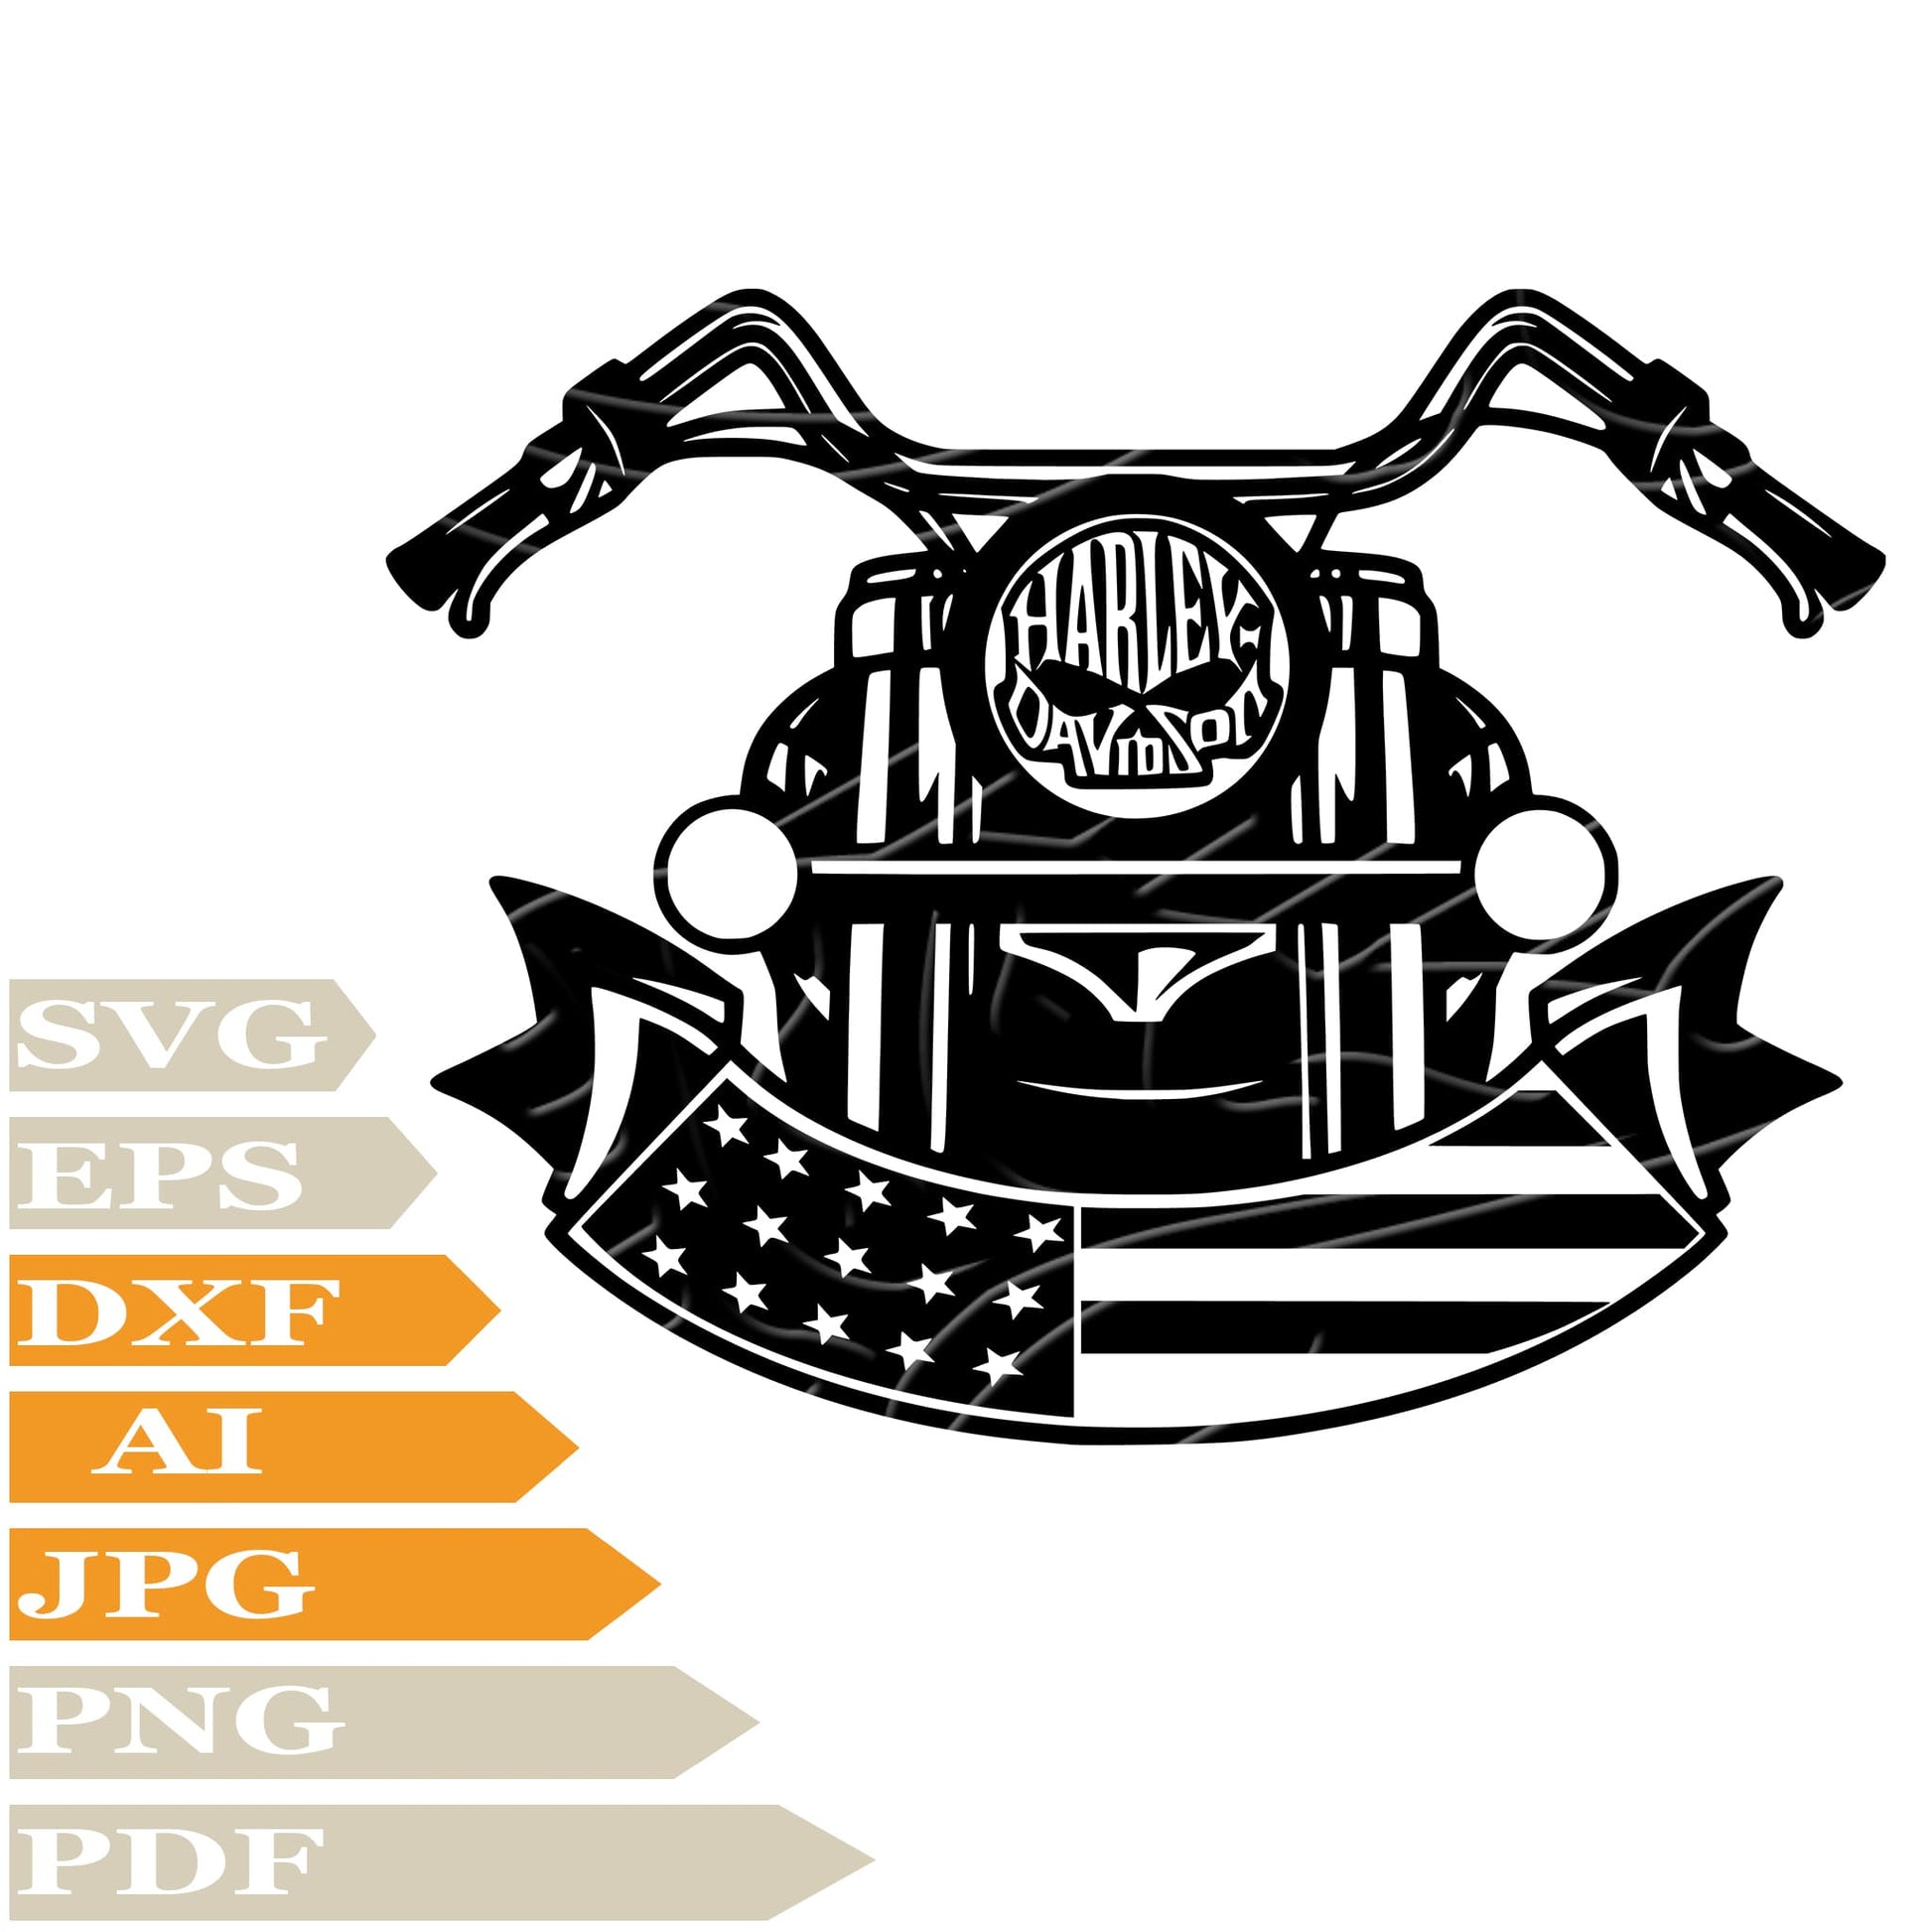 Motorcycle SVG File - Motorcycle Harley Davidson Vector Graphics - Skull Harley Davidson SVG Design - Motorcycle Harley Davidson PNG-Cricut-Cut File-Clipart-For Tattoo-Print-Decal-Shirt-Silhouette